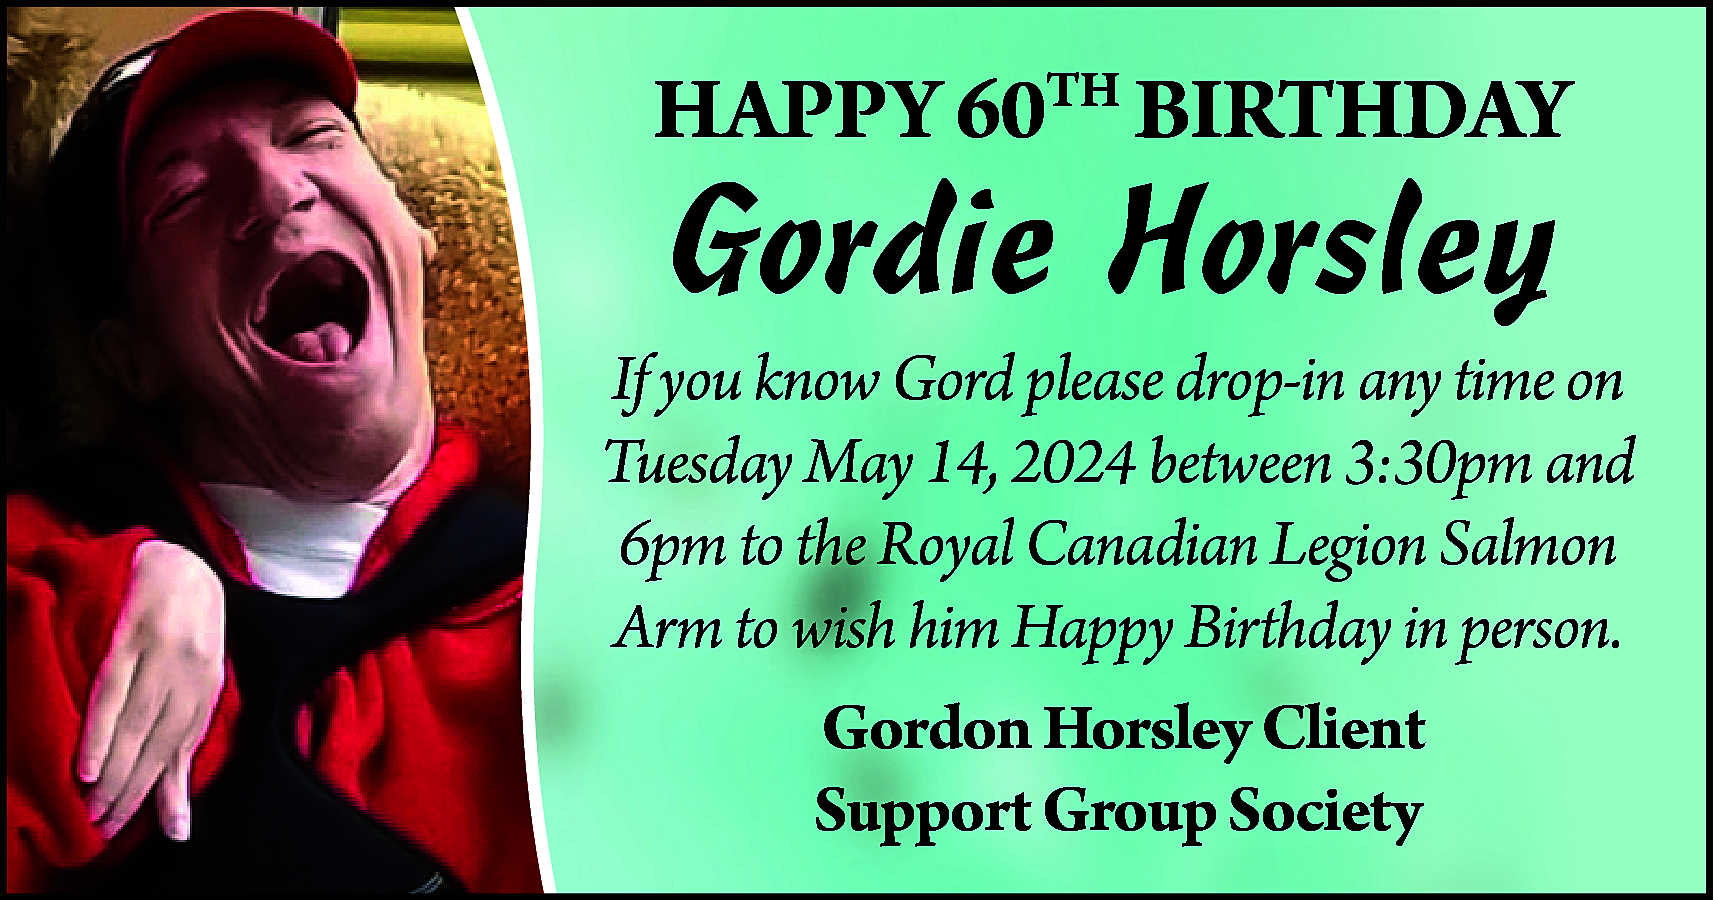 HAPPY 60TH BIRTHDAY <br> <br>Gordie  HAPPY 60TH BIRTHDAY    Gordie Horsley    If you know Gord please drop-in any time on  Tuesday May 14, 2024 between 3:30pm and  6pm to the Royal Canadian Legion Salmon  Arm to wish him Happy Birthday in person.  Gordon Horsley Client  Support Group Society    